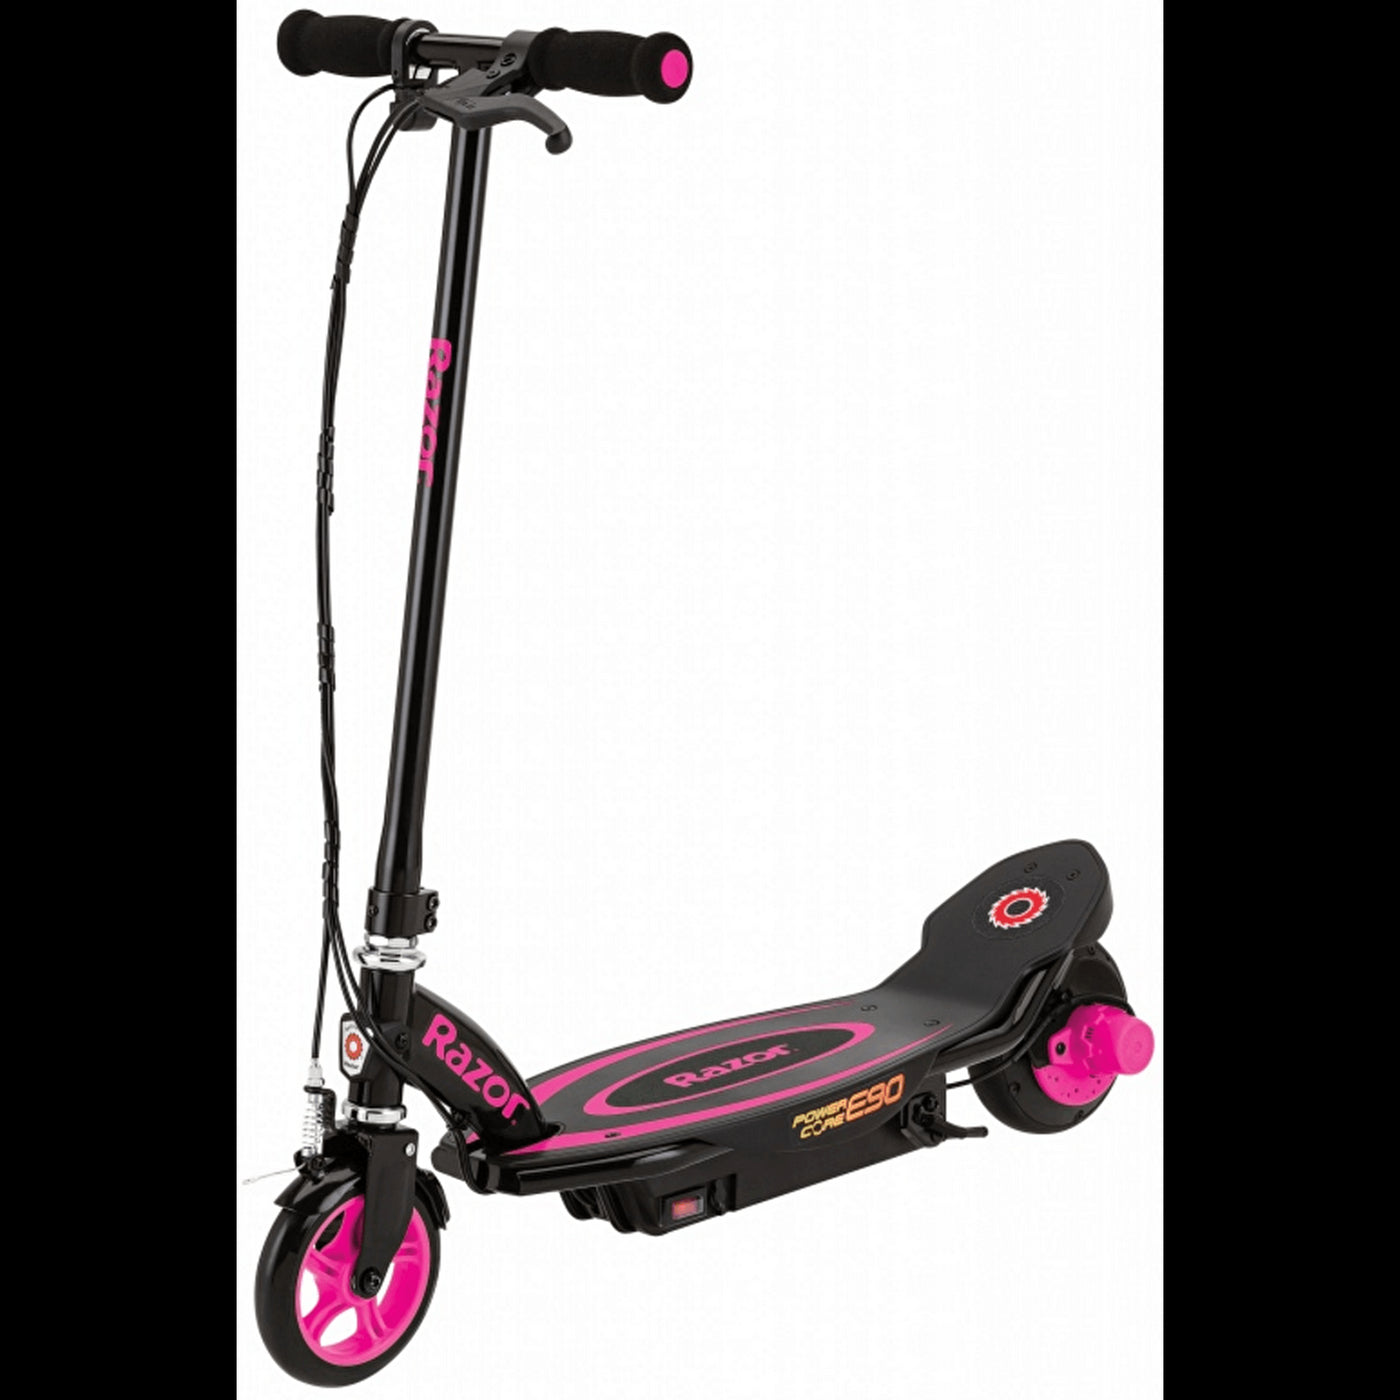 razor e90 electric scooter pink